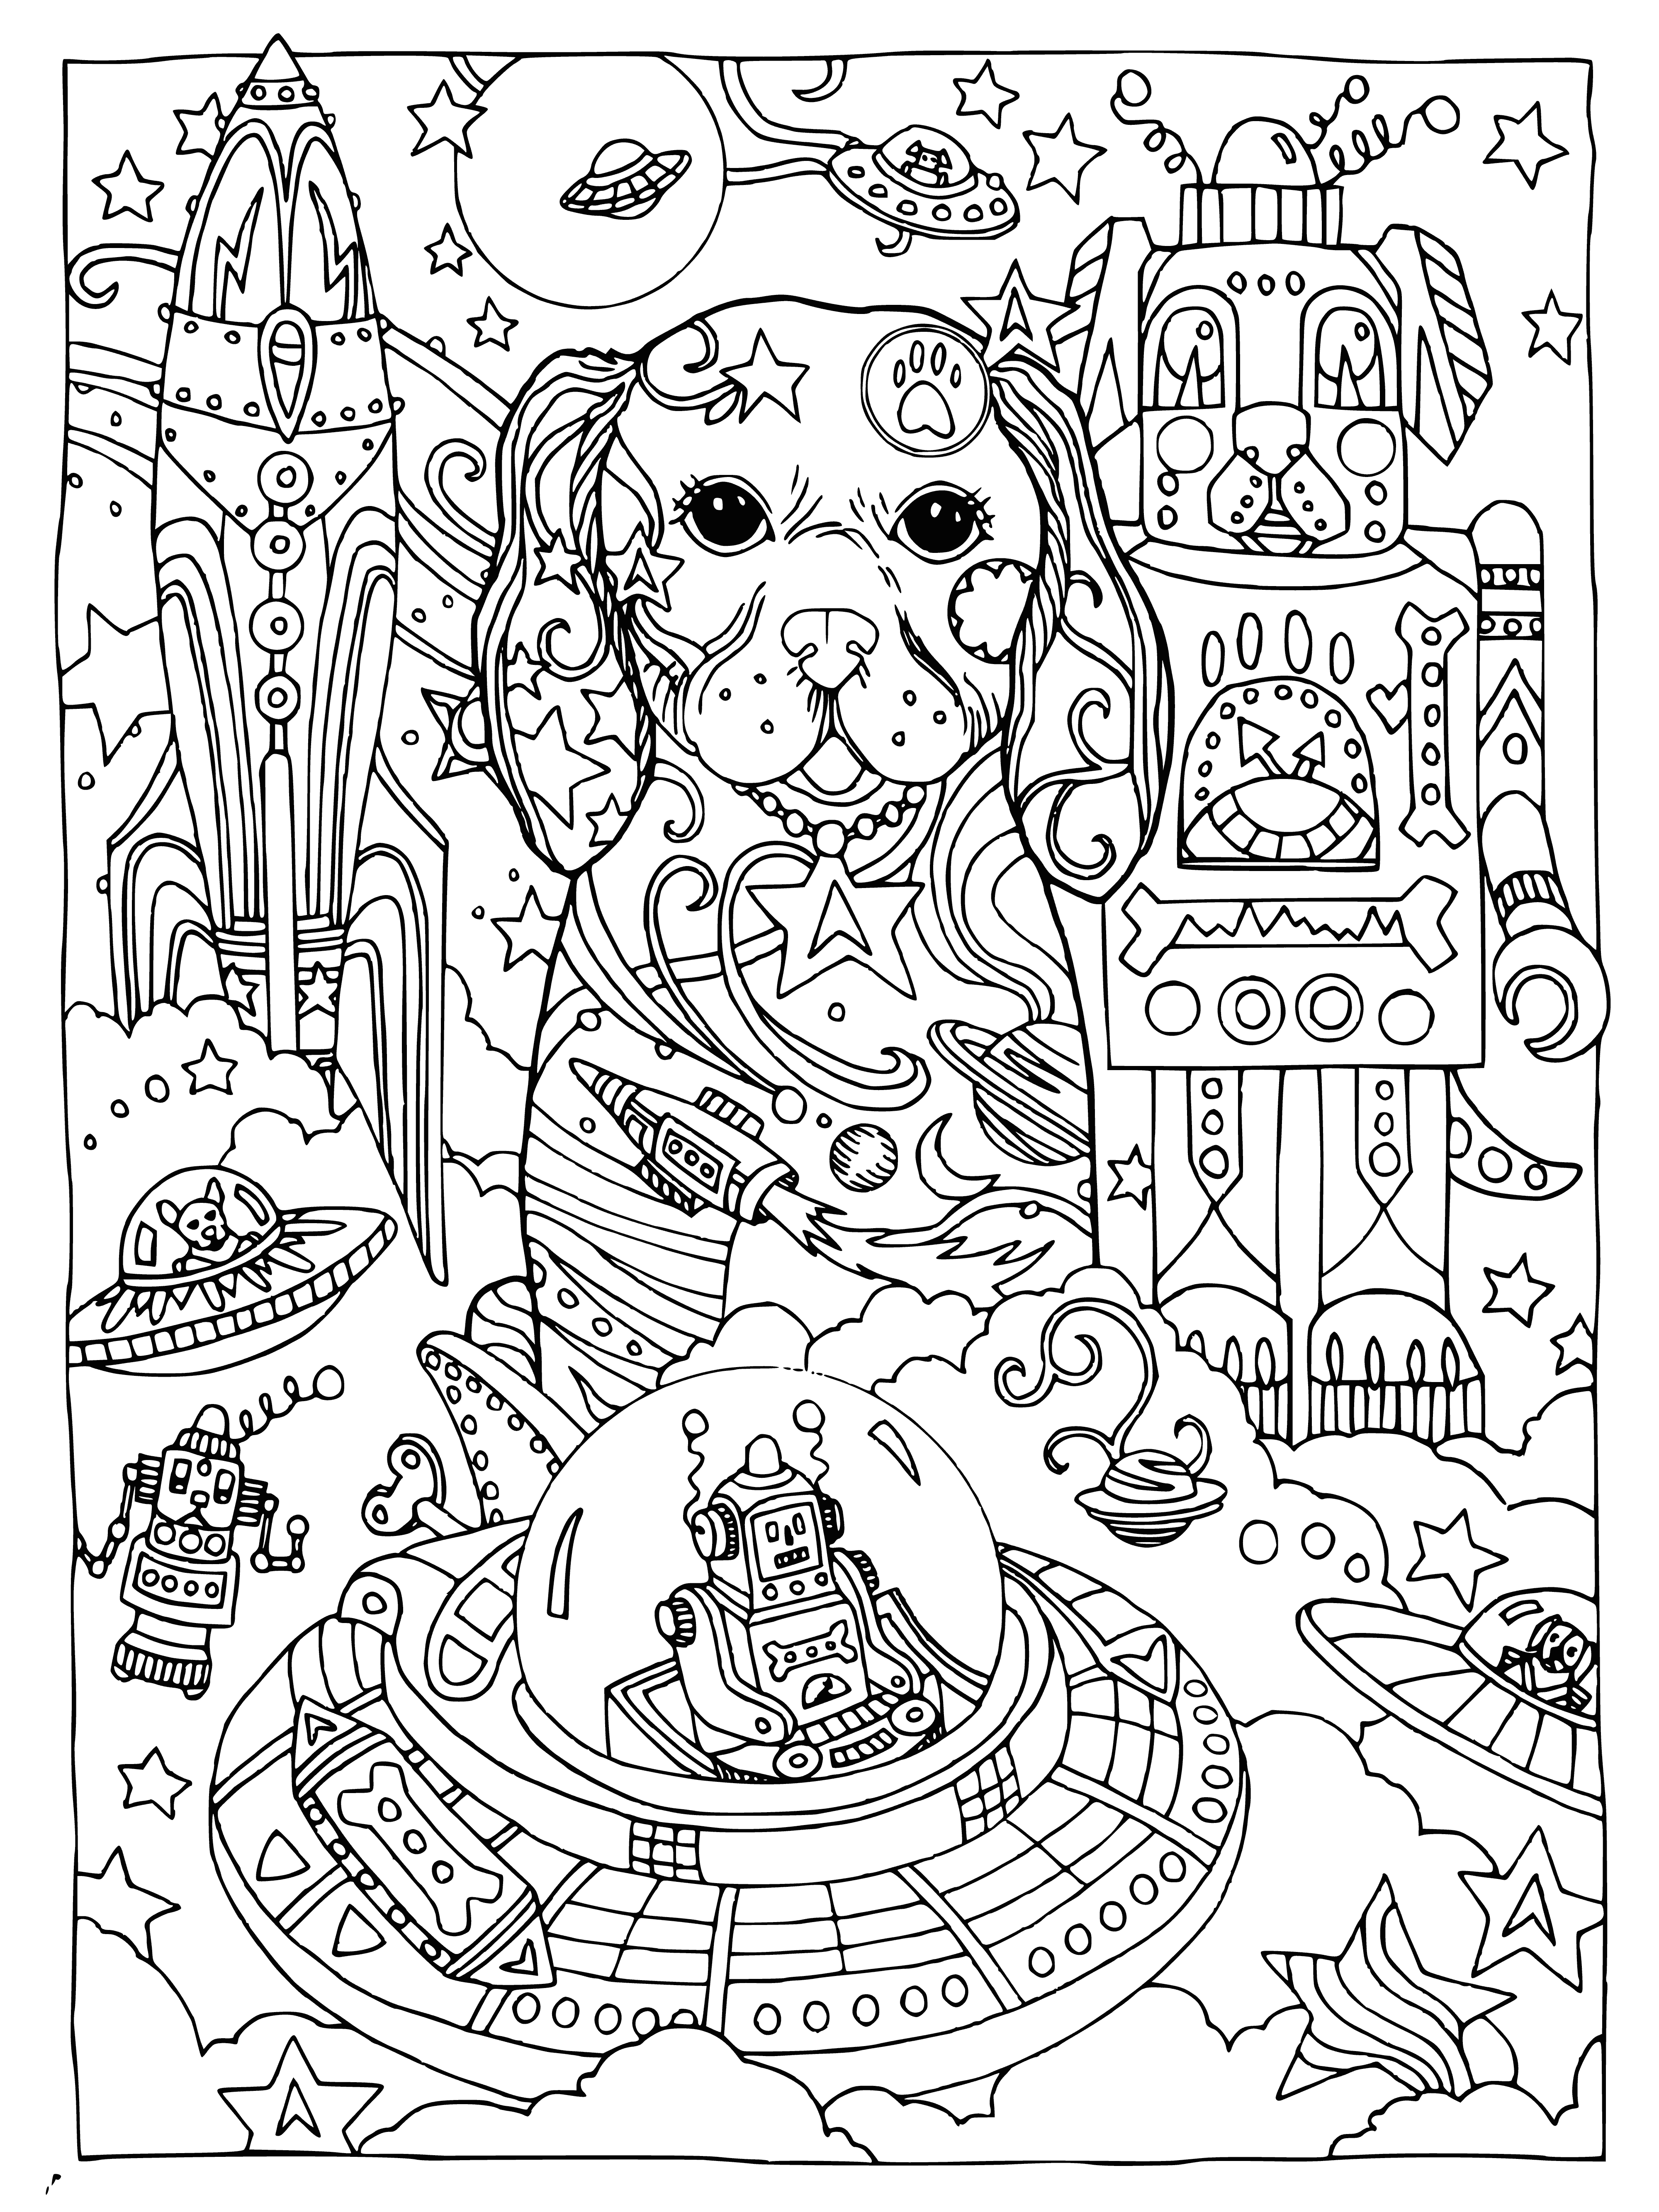 coloring page: Dog & robot playing fetch on a hill; both look to be having fun.